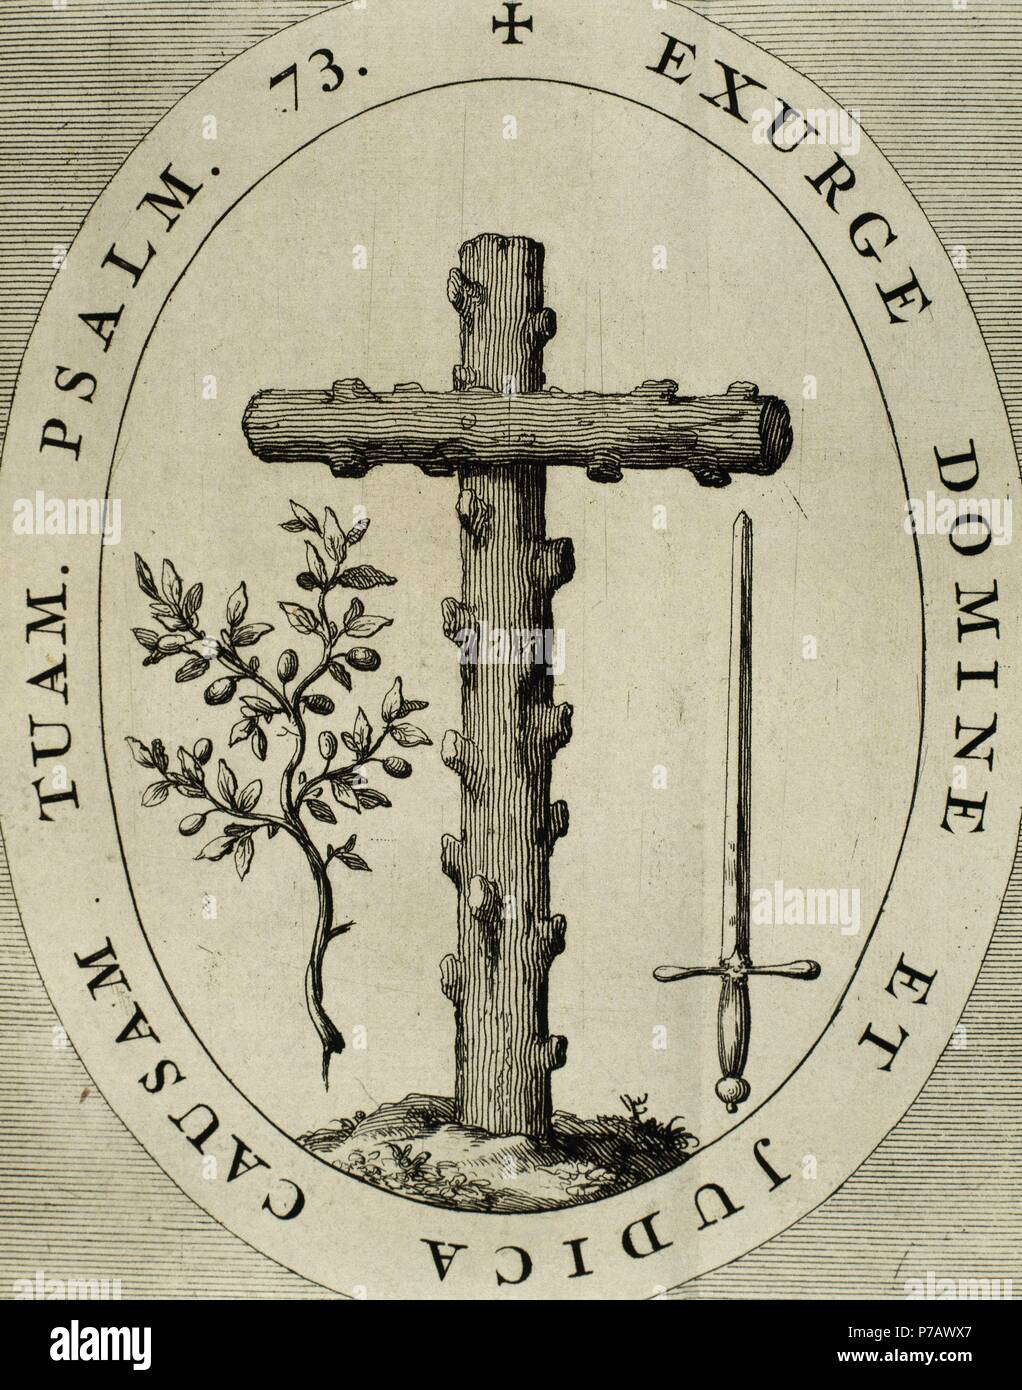 Emblem of the Inquisition. Engraving, 1692. Stock Photo